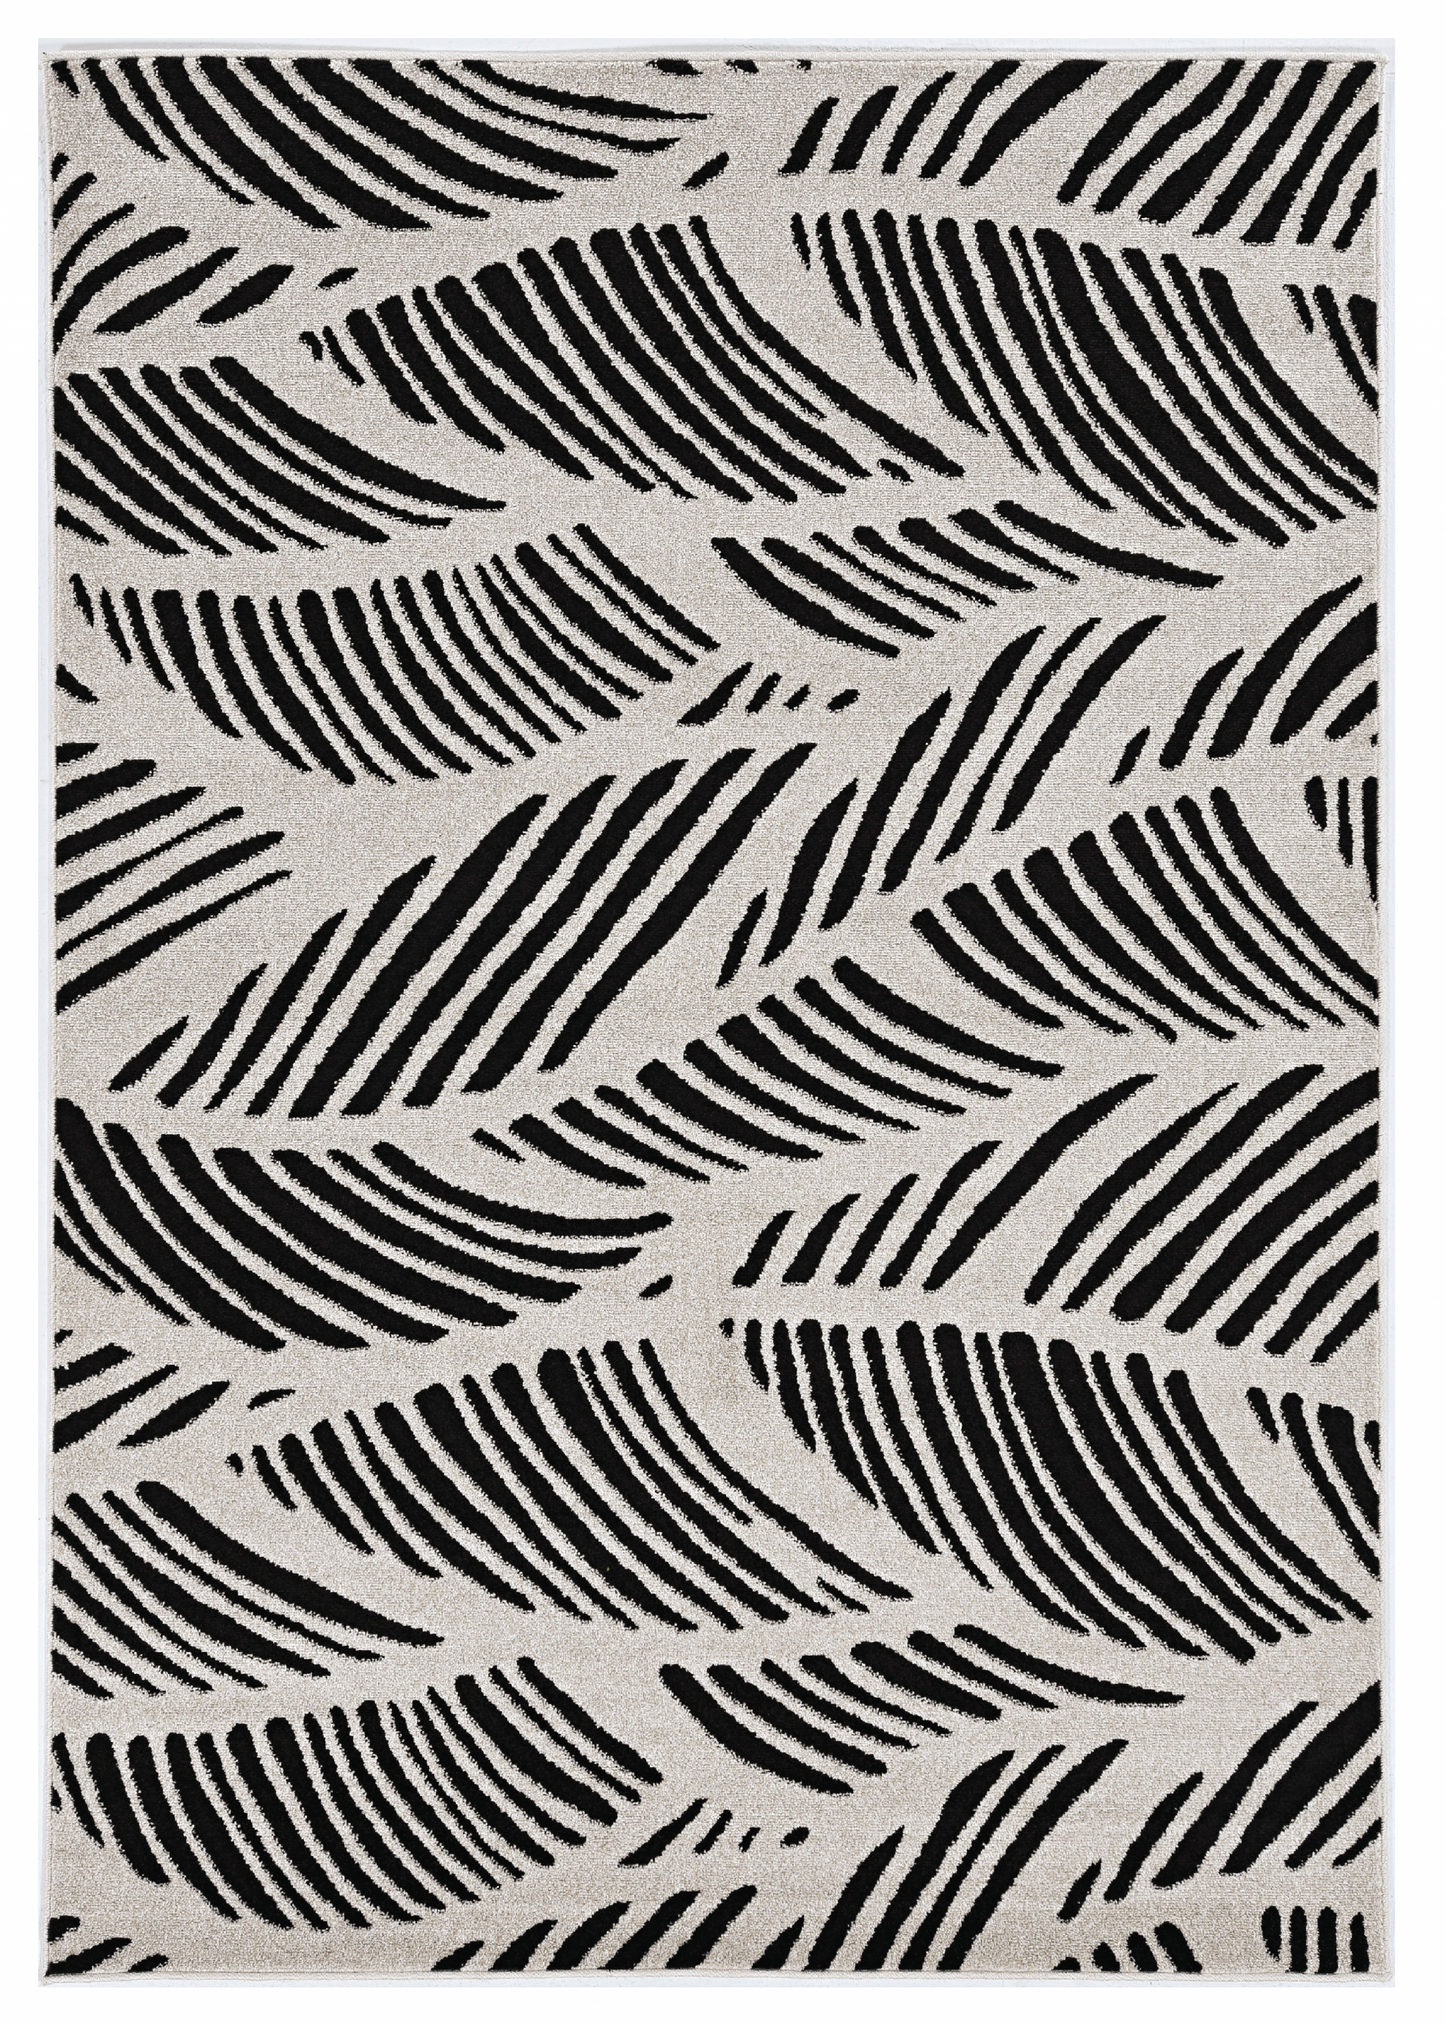 5'X8' Black White Machine Woven Uv Treated Oversized Leaves Indoor Outdoor Area Rug